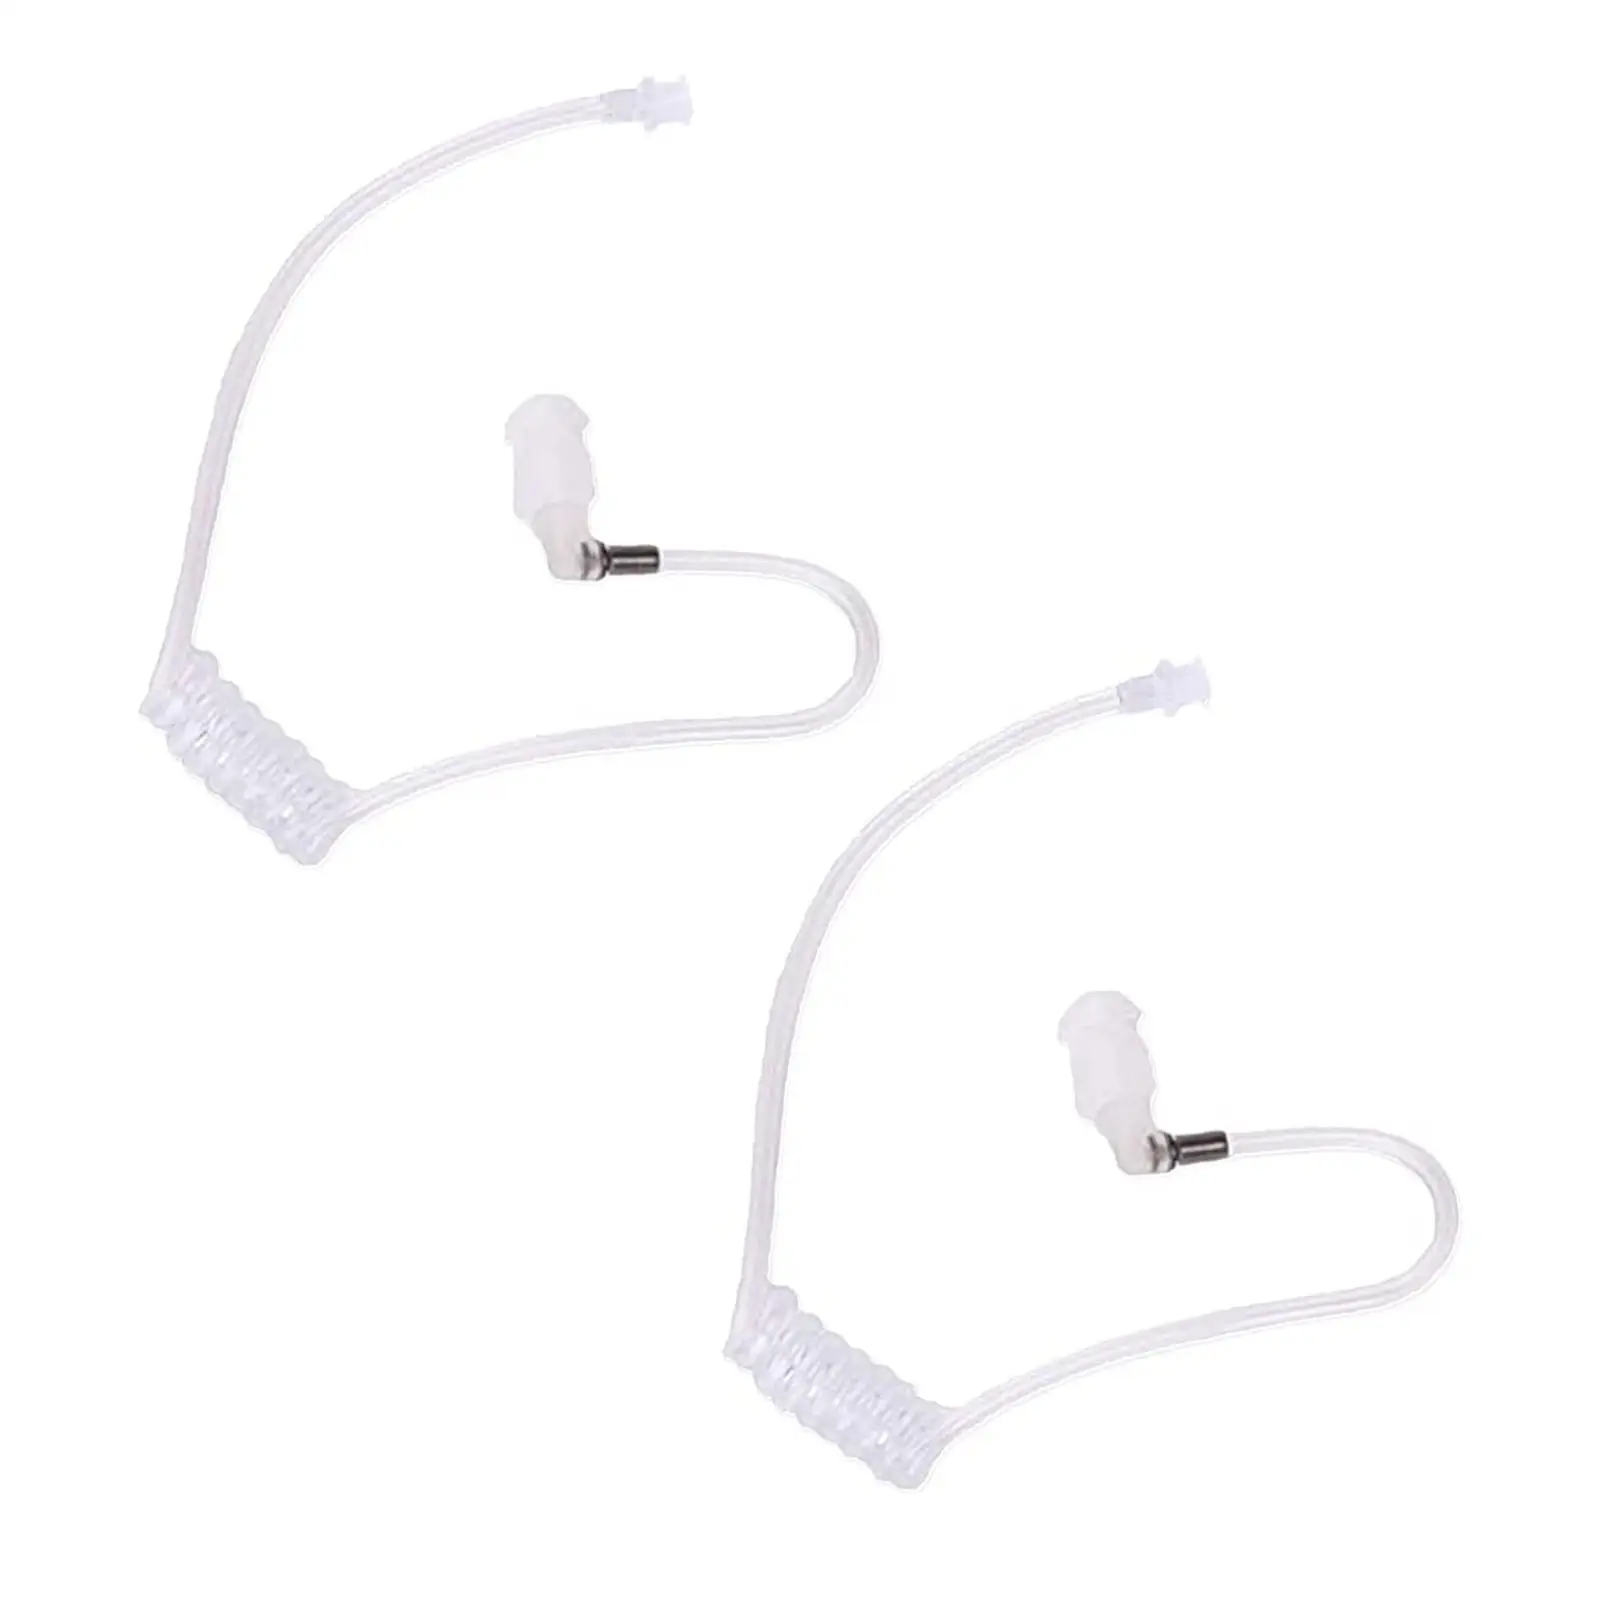 2x Replacement Acoustic Coil Tube Clear and White Easy to Be Replaced for Two Way Radio Intercom Earpiece Air Duct Headphones